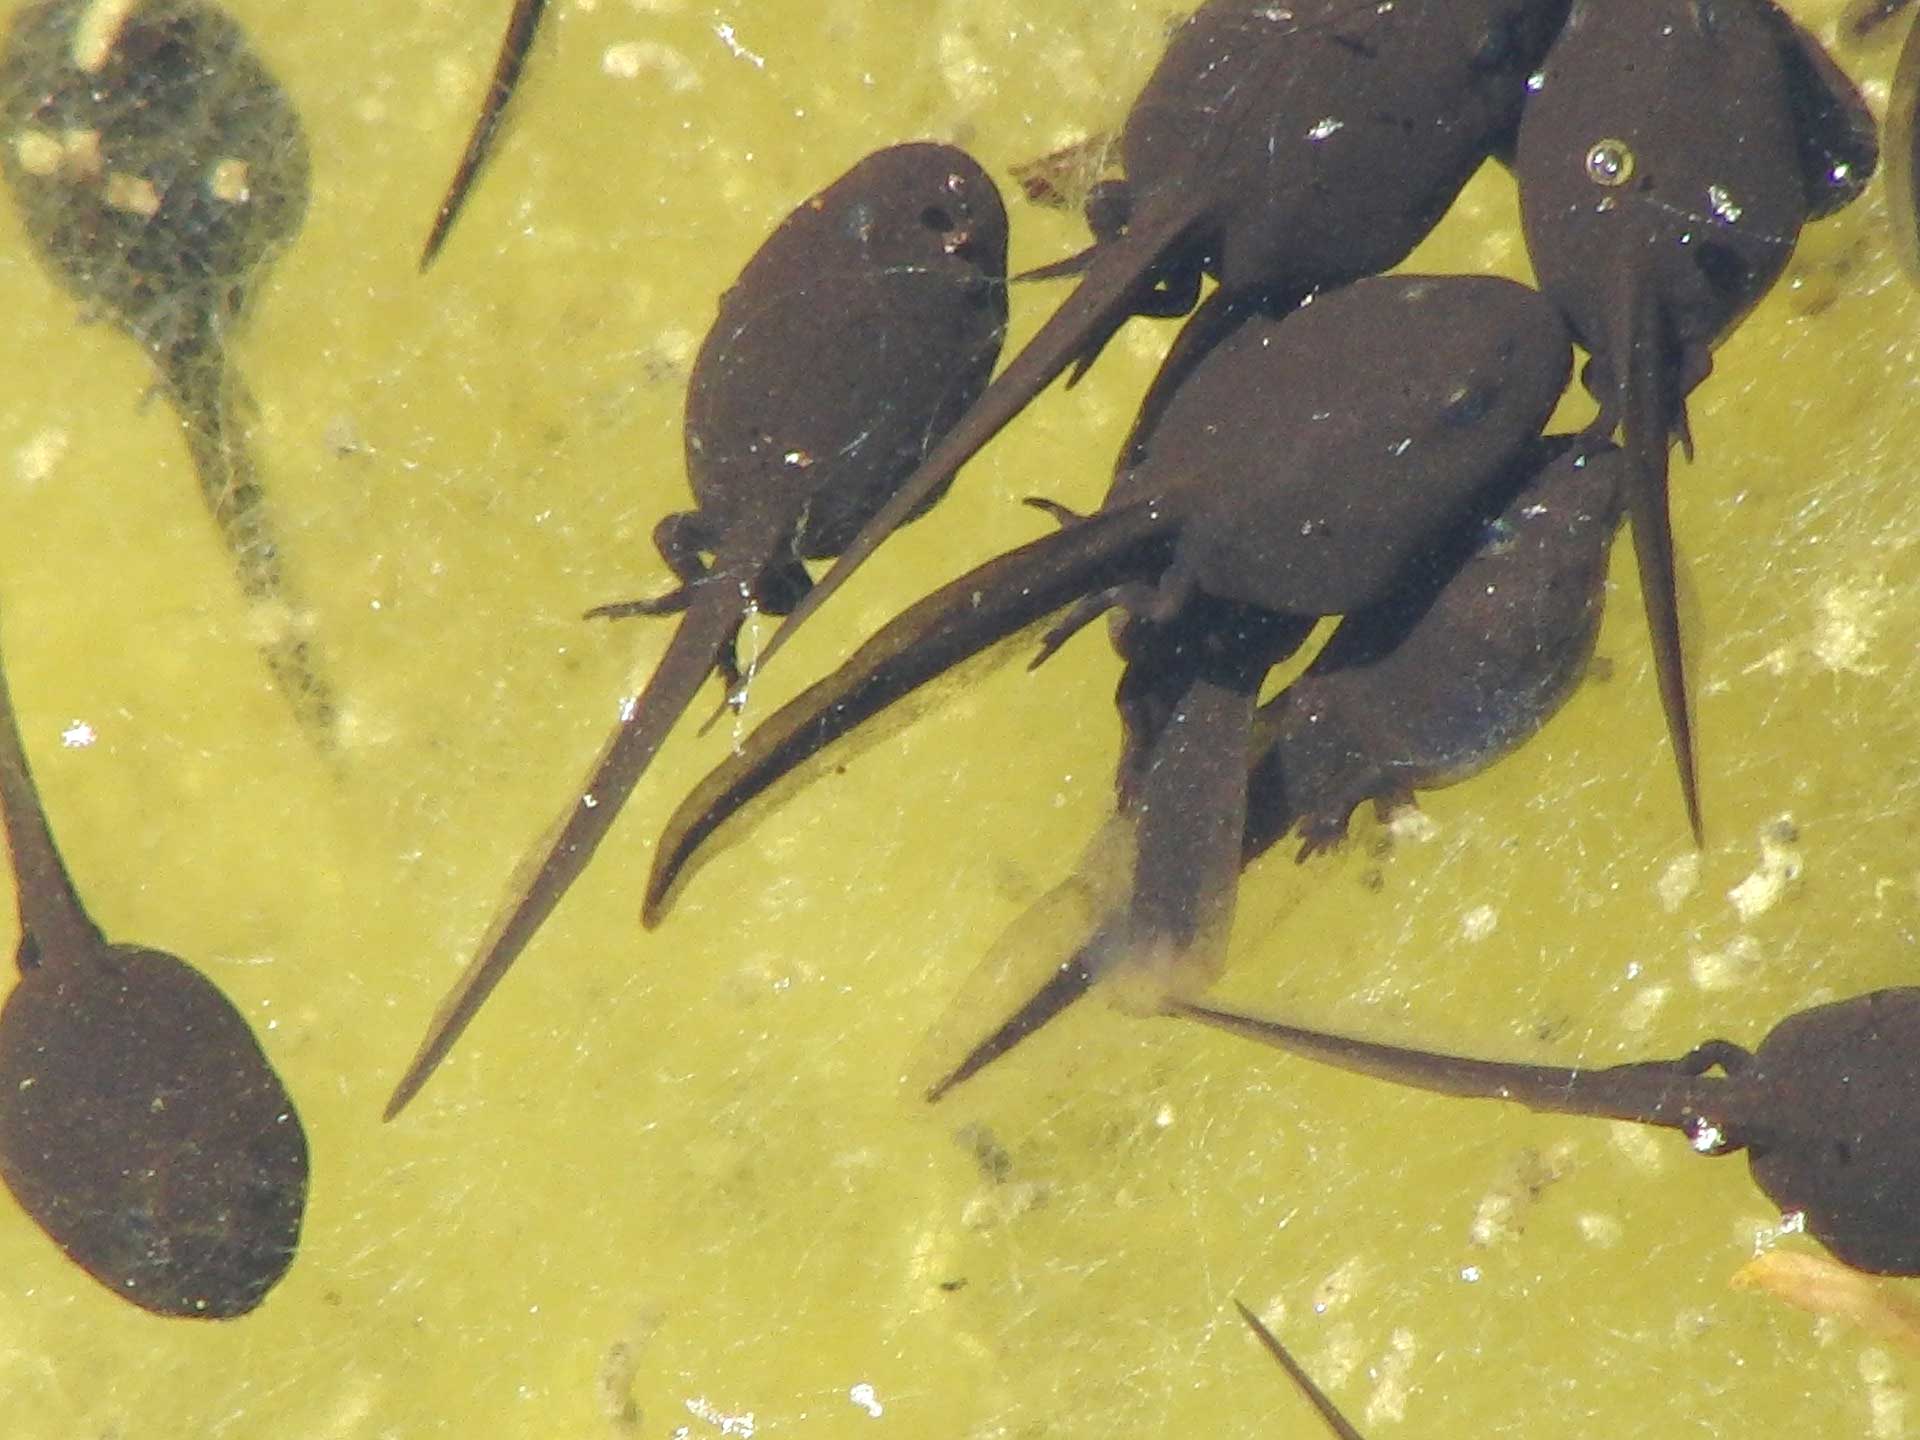 How Long Does It Take for Tadpoles to Turn into Frogs?